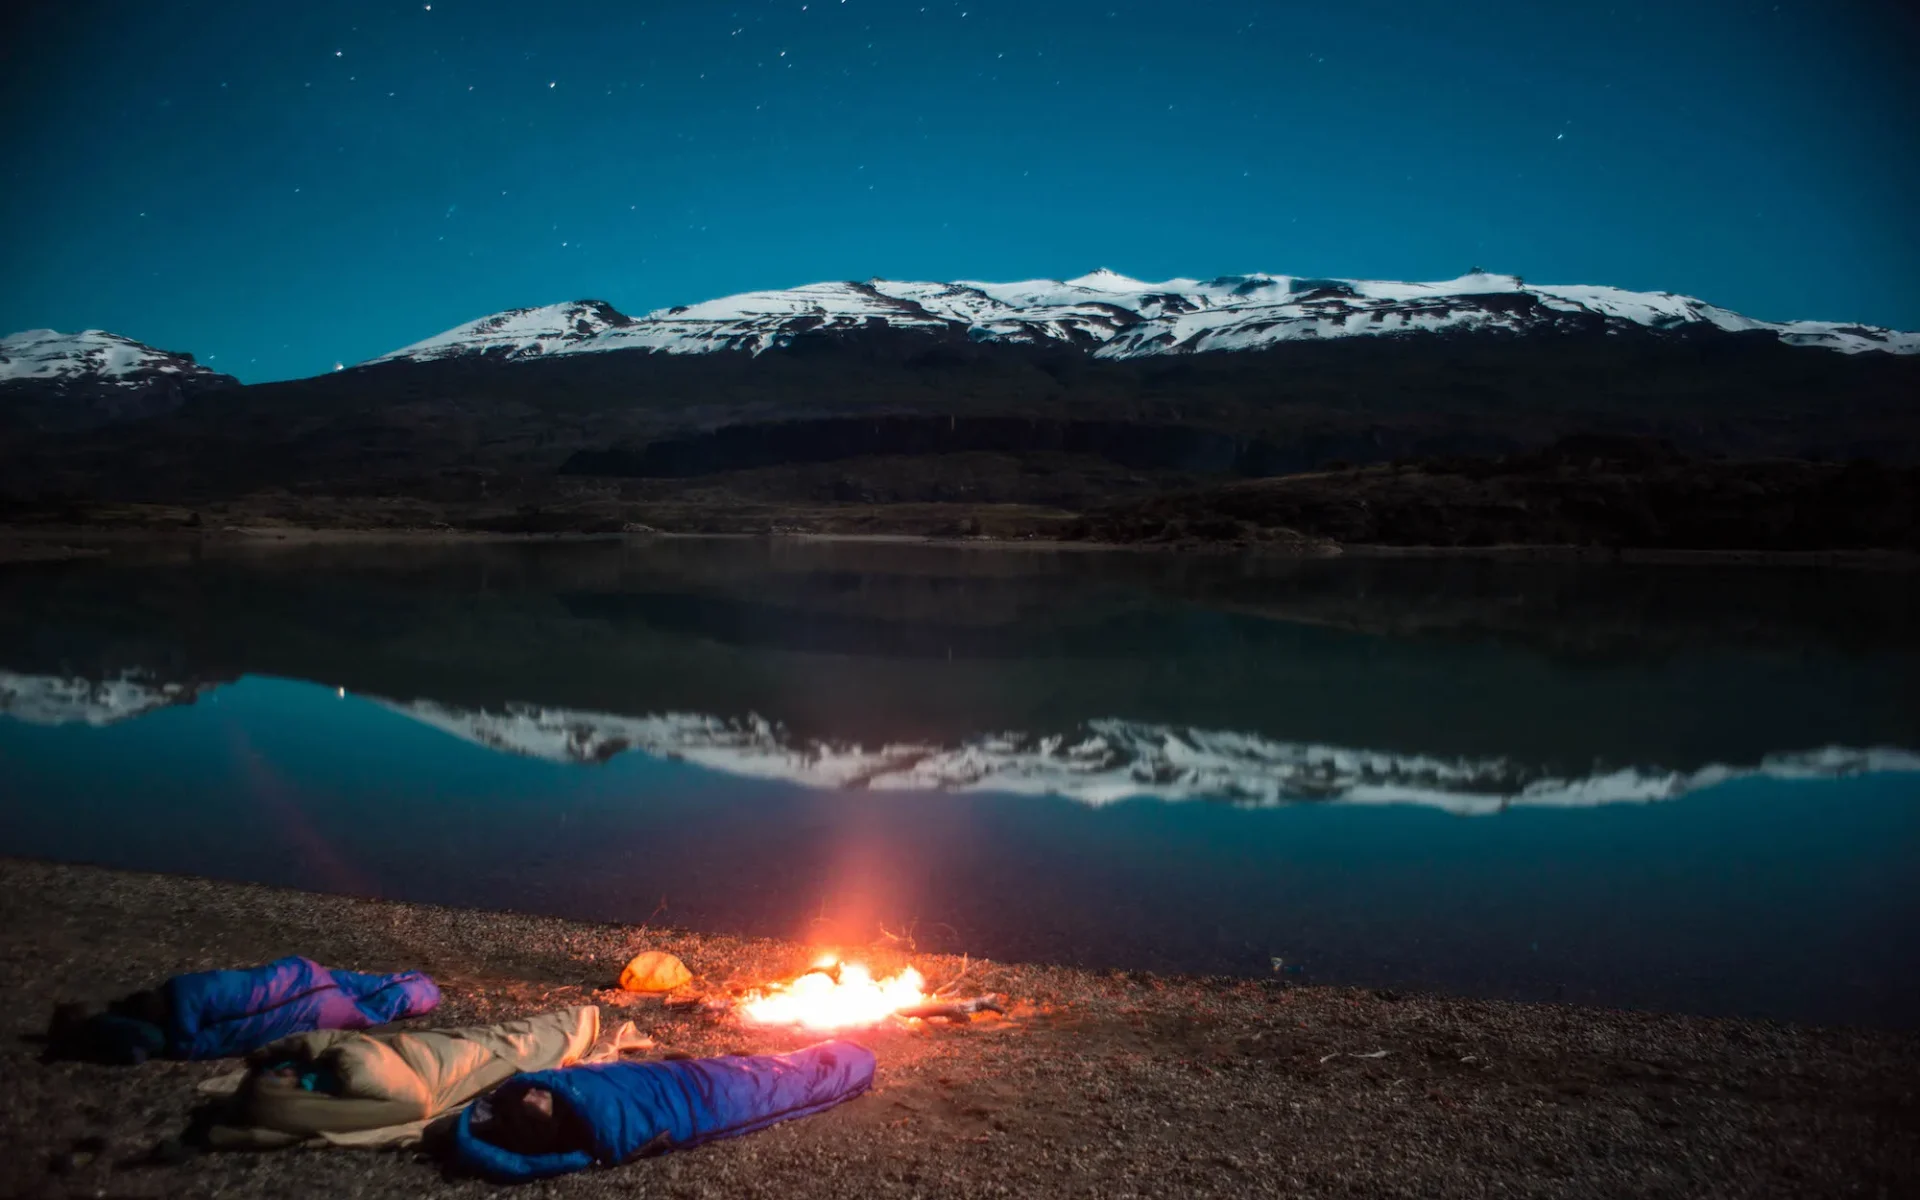 Three people cosy up in sleeping bags beside a log fire, ahead of an evening scene of the lake and the tumbling Andes.